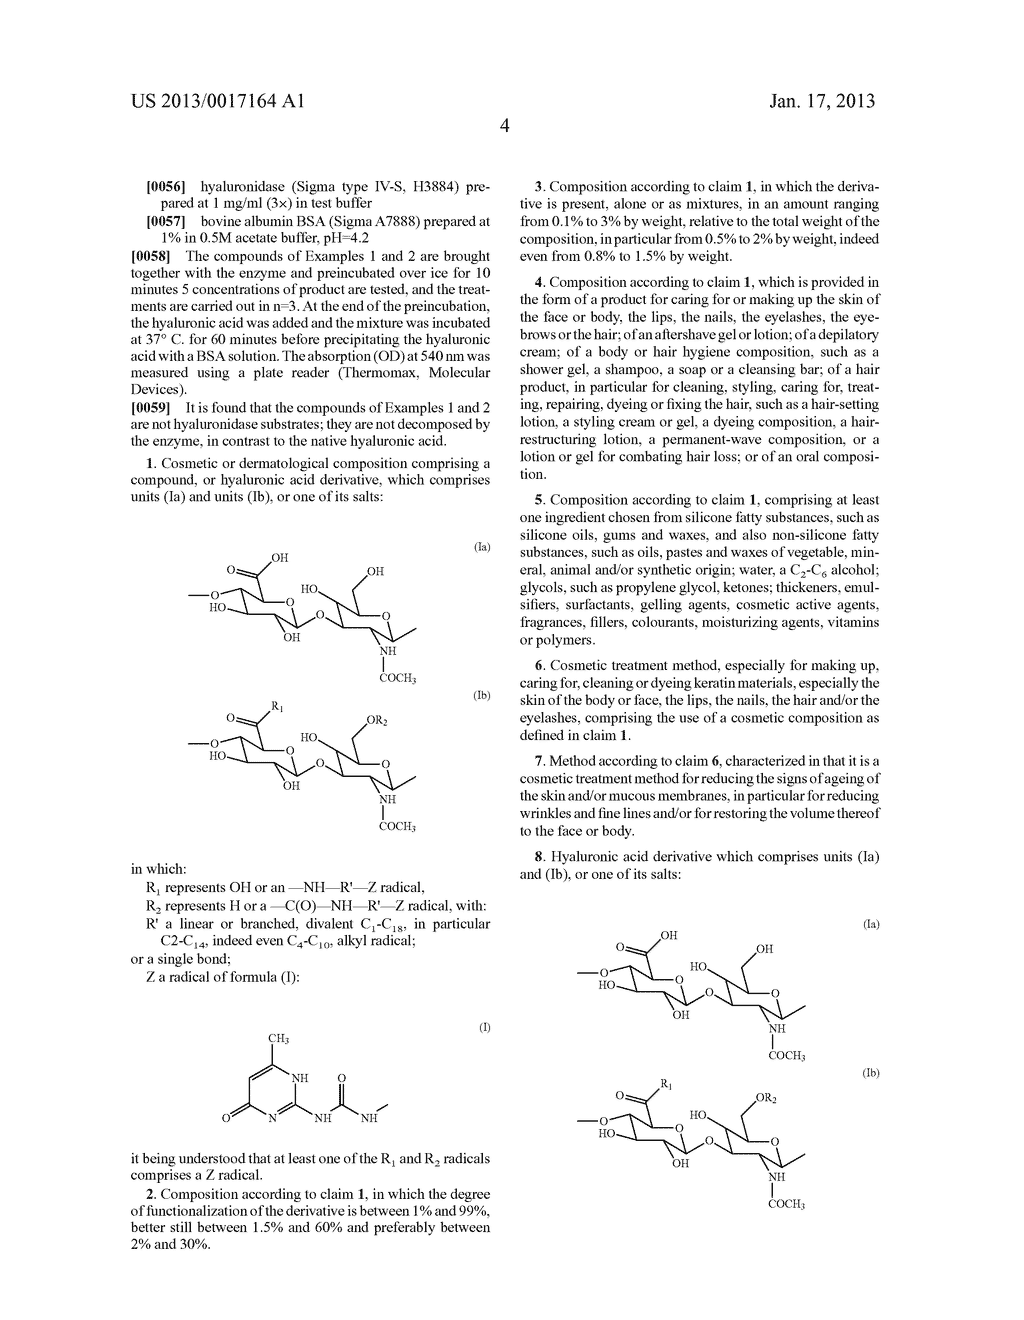 COSMETIC DERMATOLOGICAL COMPOSITION, COSMETIC TREATMENT METHOD, AND     HYALURONIC ACID DERIVATIVE - diagram, schematic, and image 05